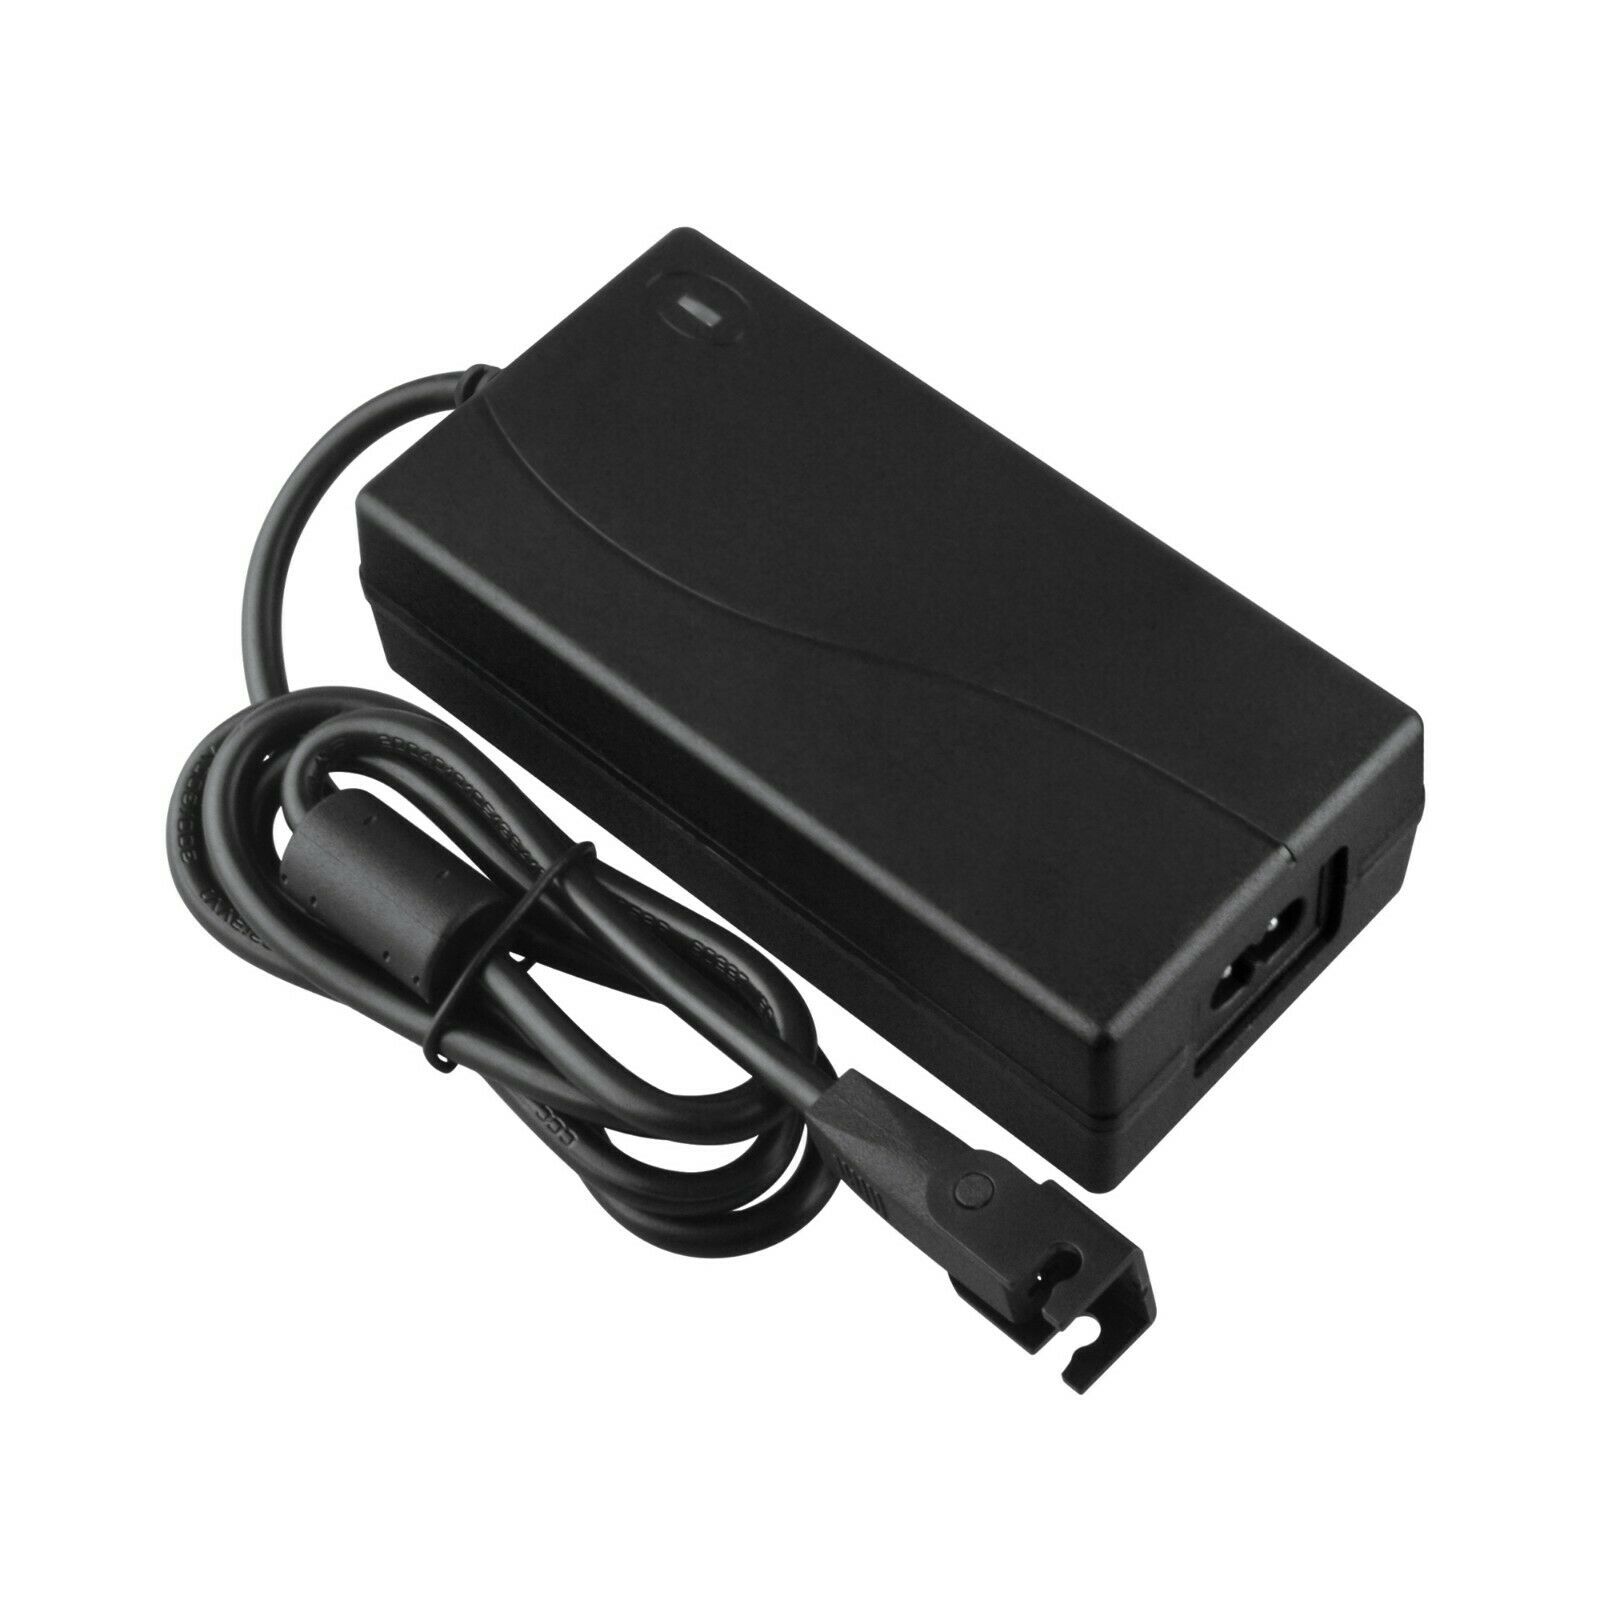 2-Prong AC/DC Adapter For Changzhou Kaidi Co Ltd P/N: KDDY001 KDDY008 KDDY001B Construction: 100% Brand New! Generic Re